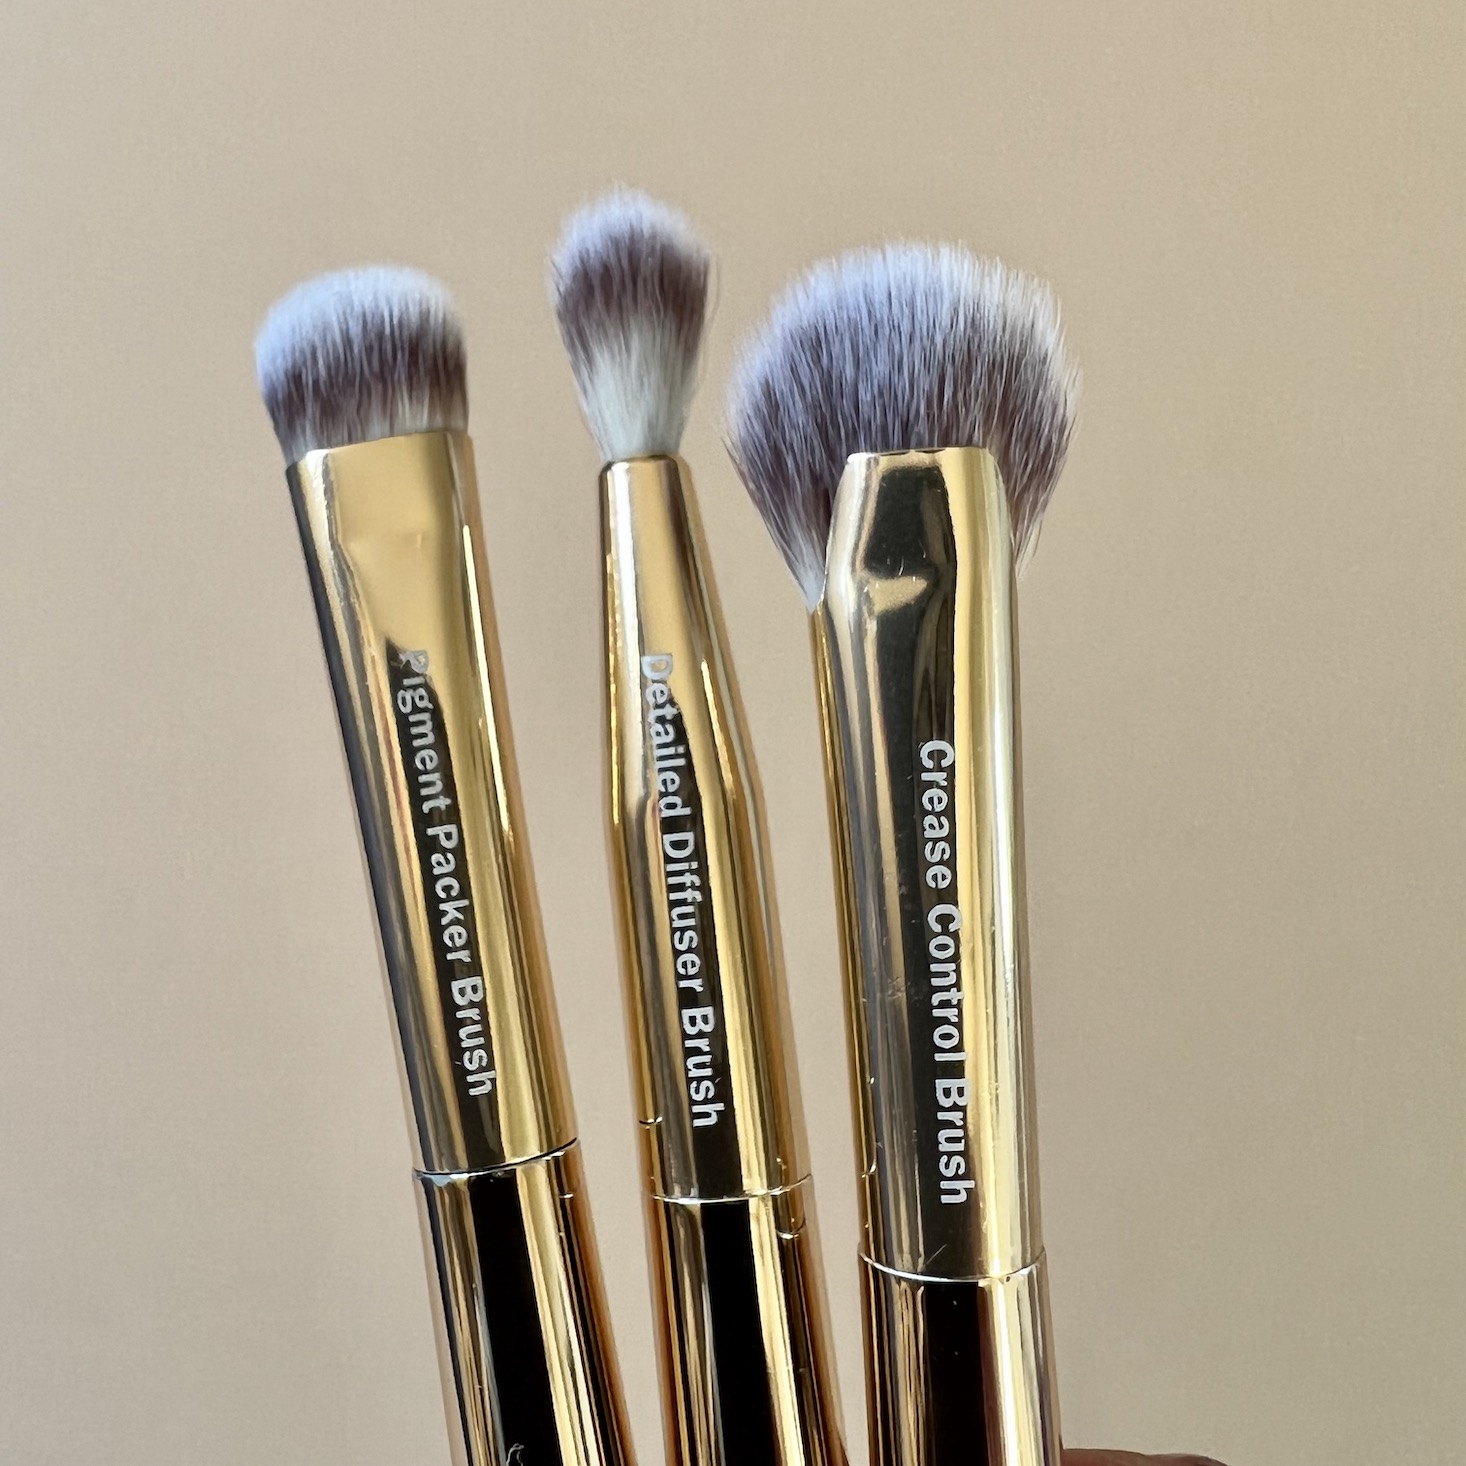 brush trio with gold handles